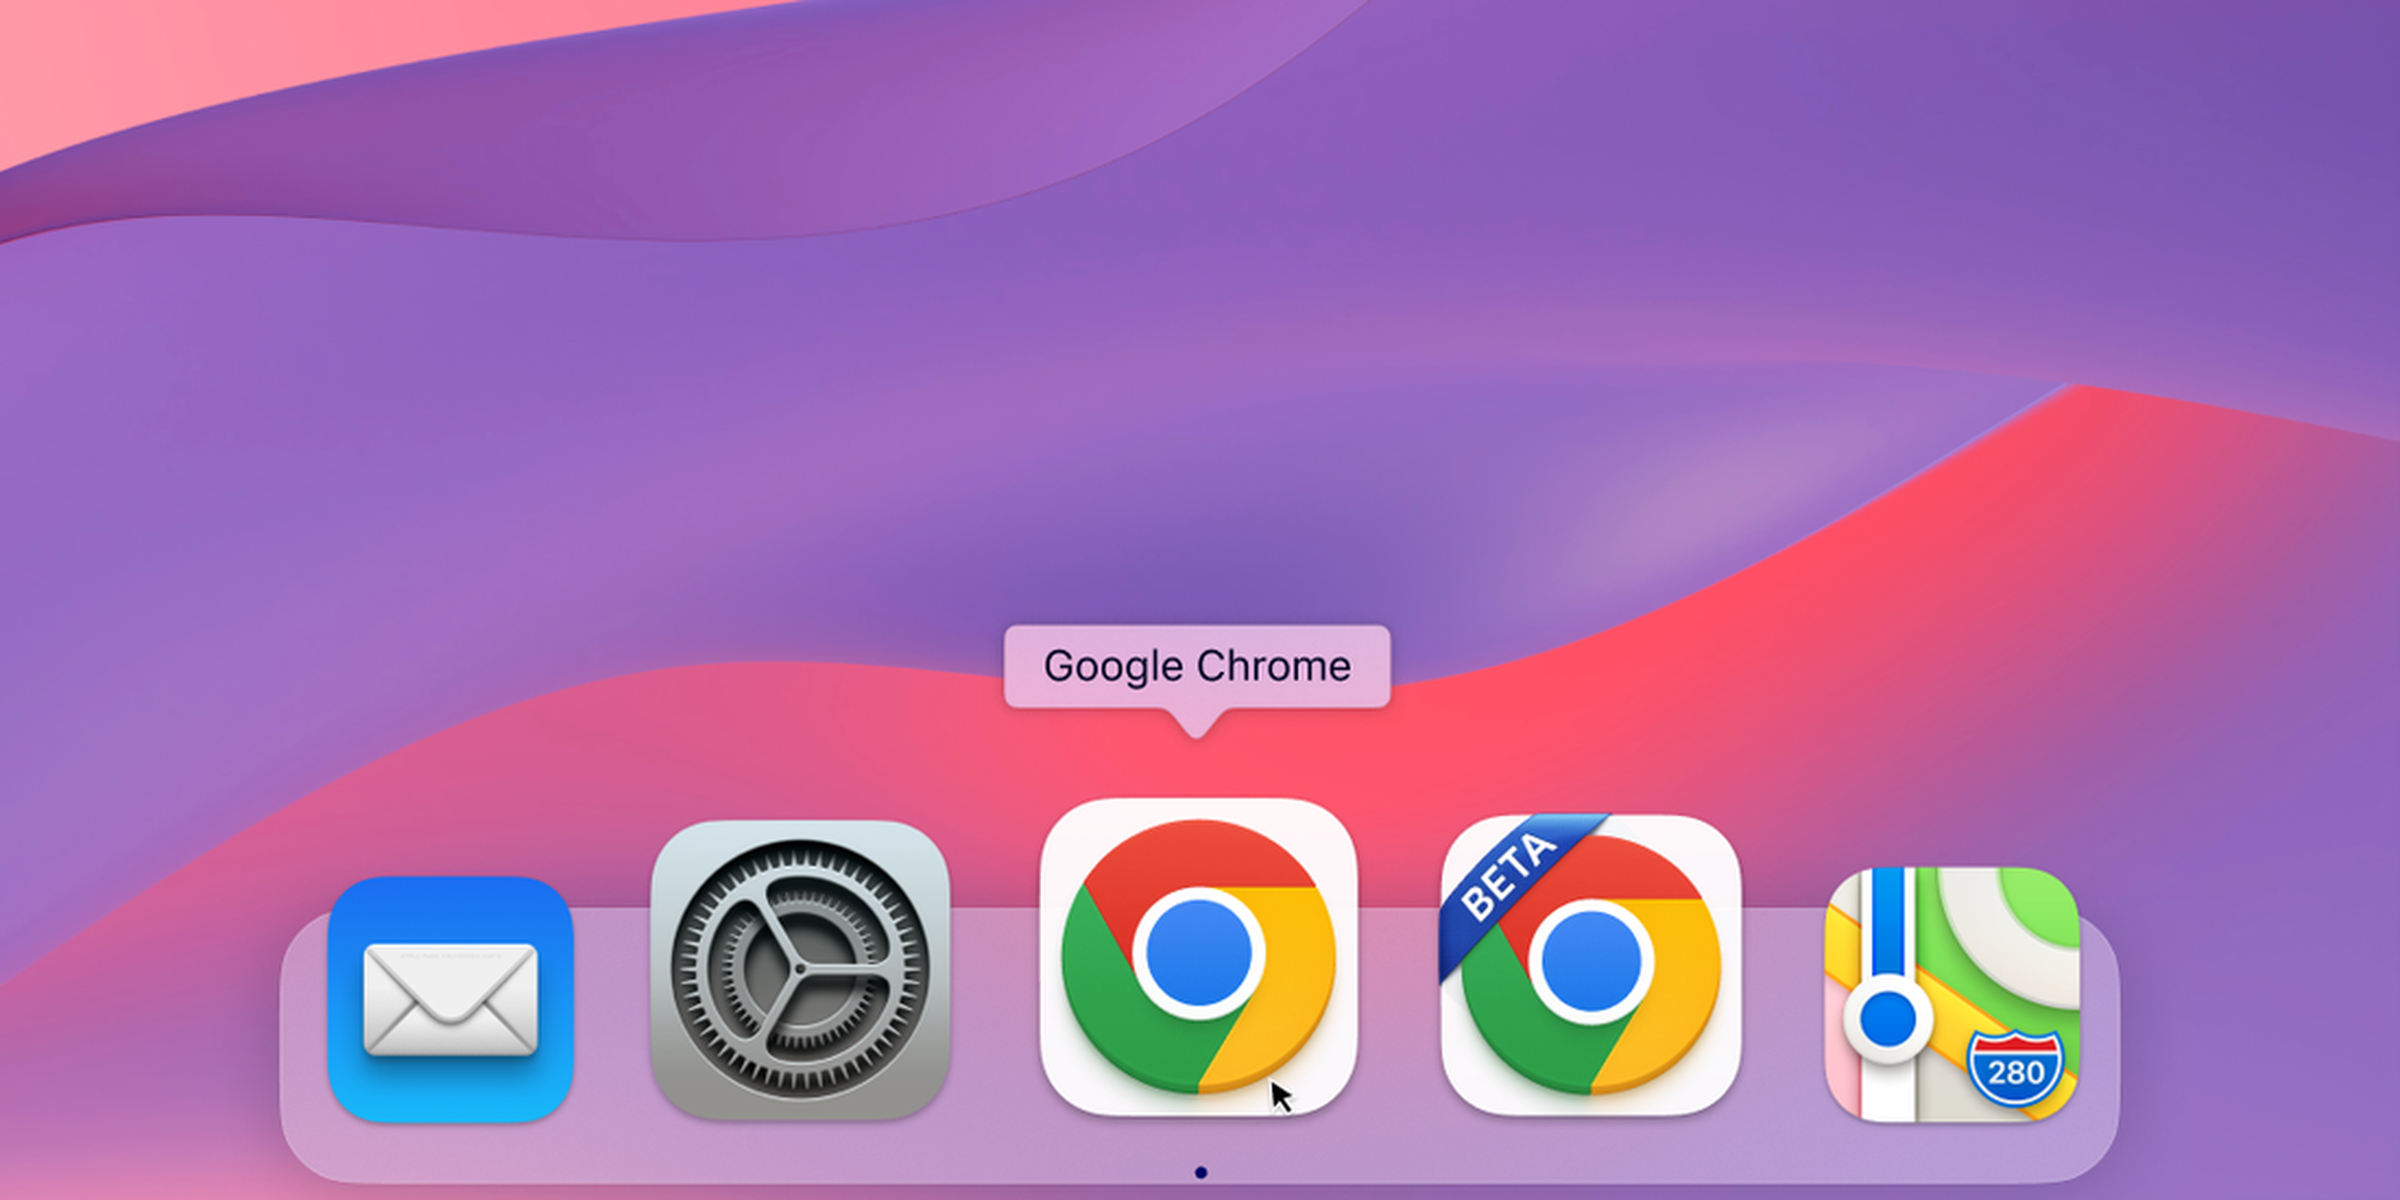 The Chrome icon on macOS has more of a 3D look.